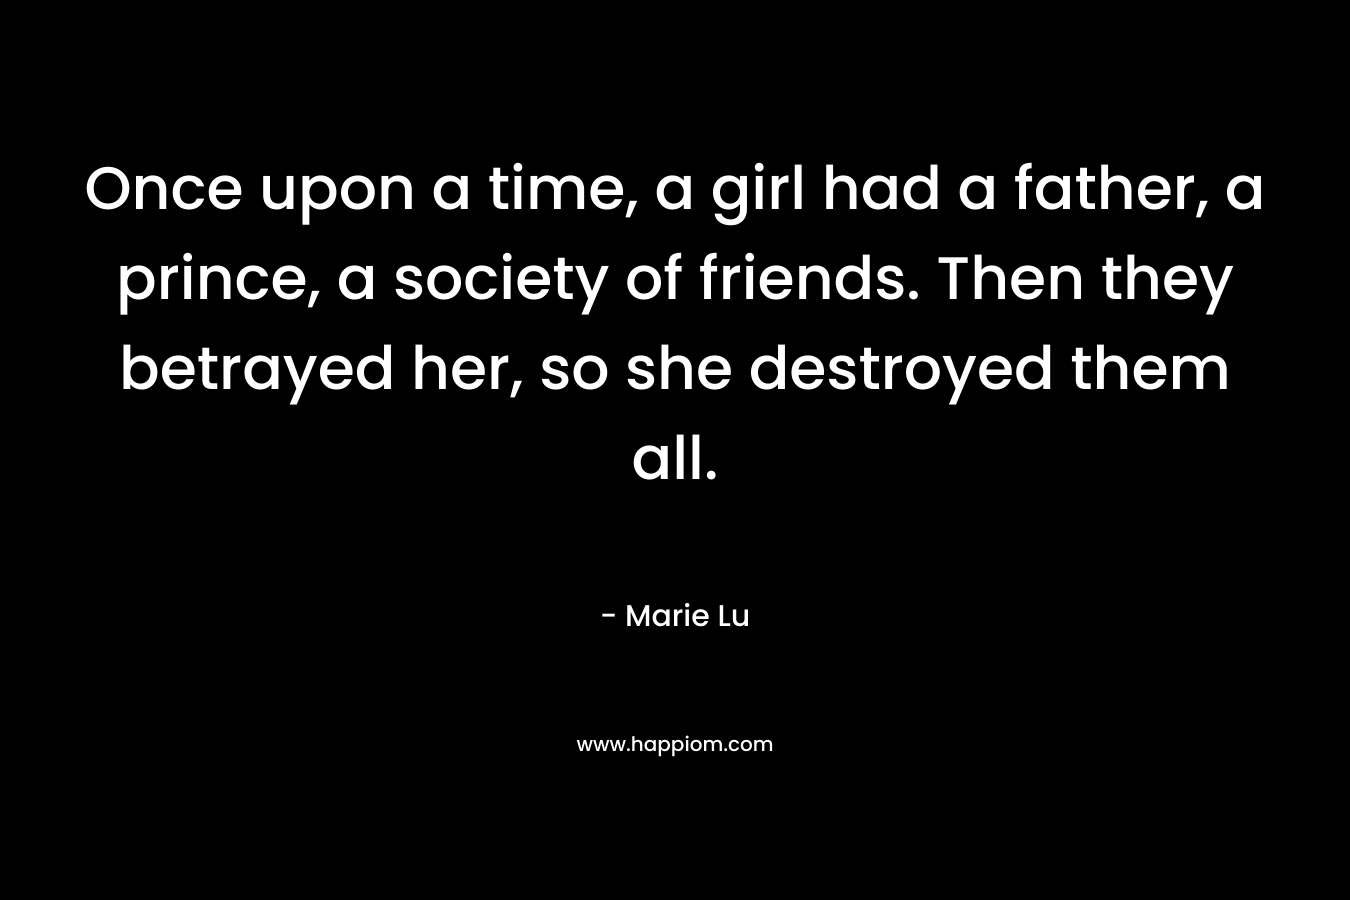 Once upon a time, a girl had a father, a prince, a society of friends. Then they betrayed her, so she destroyed them all. – Marie Lu